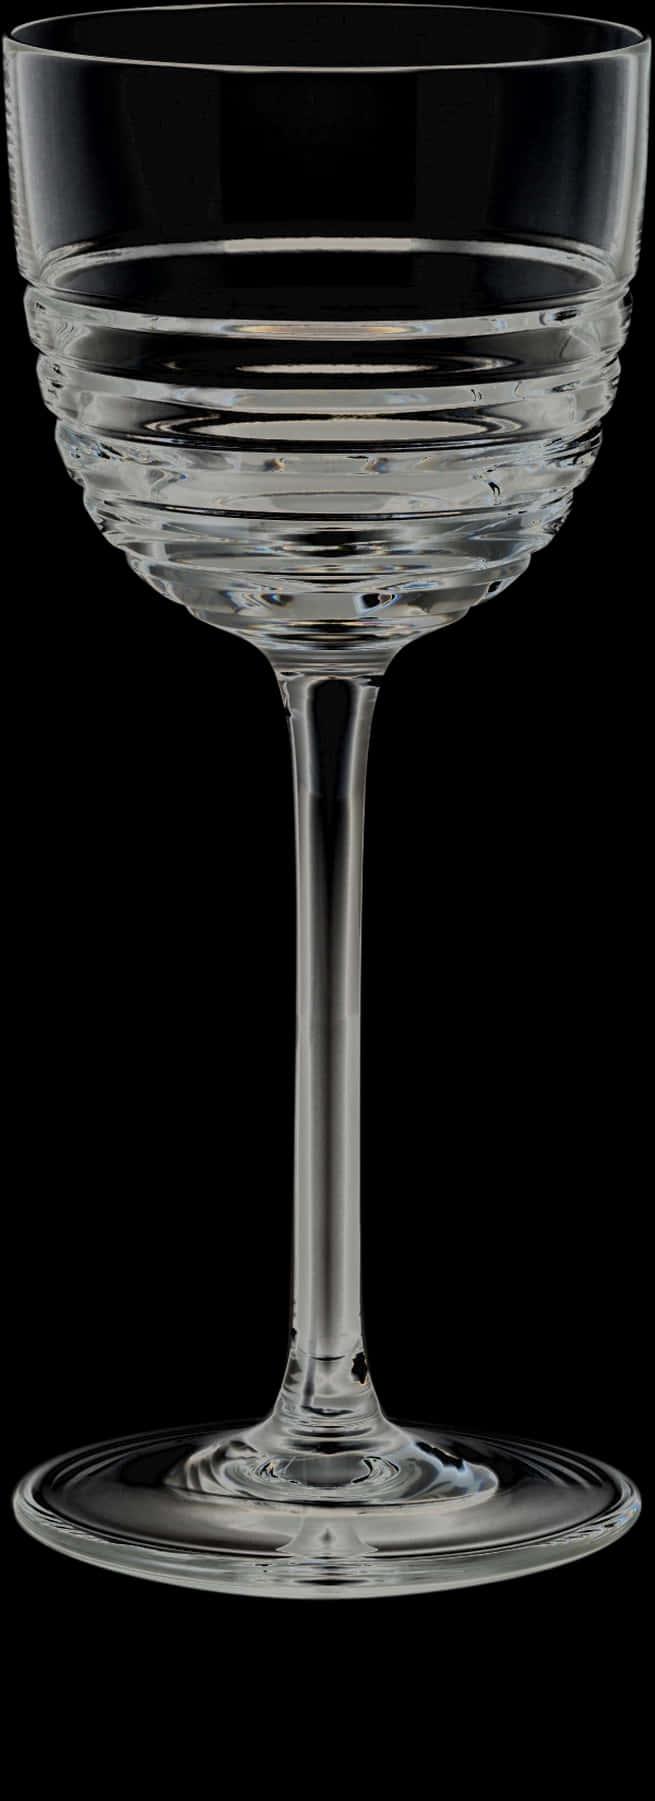 A Clear Glass With A Long Stem